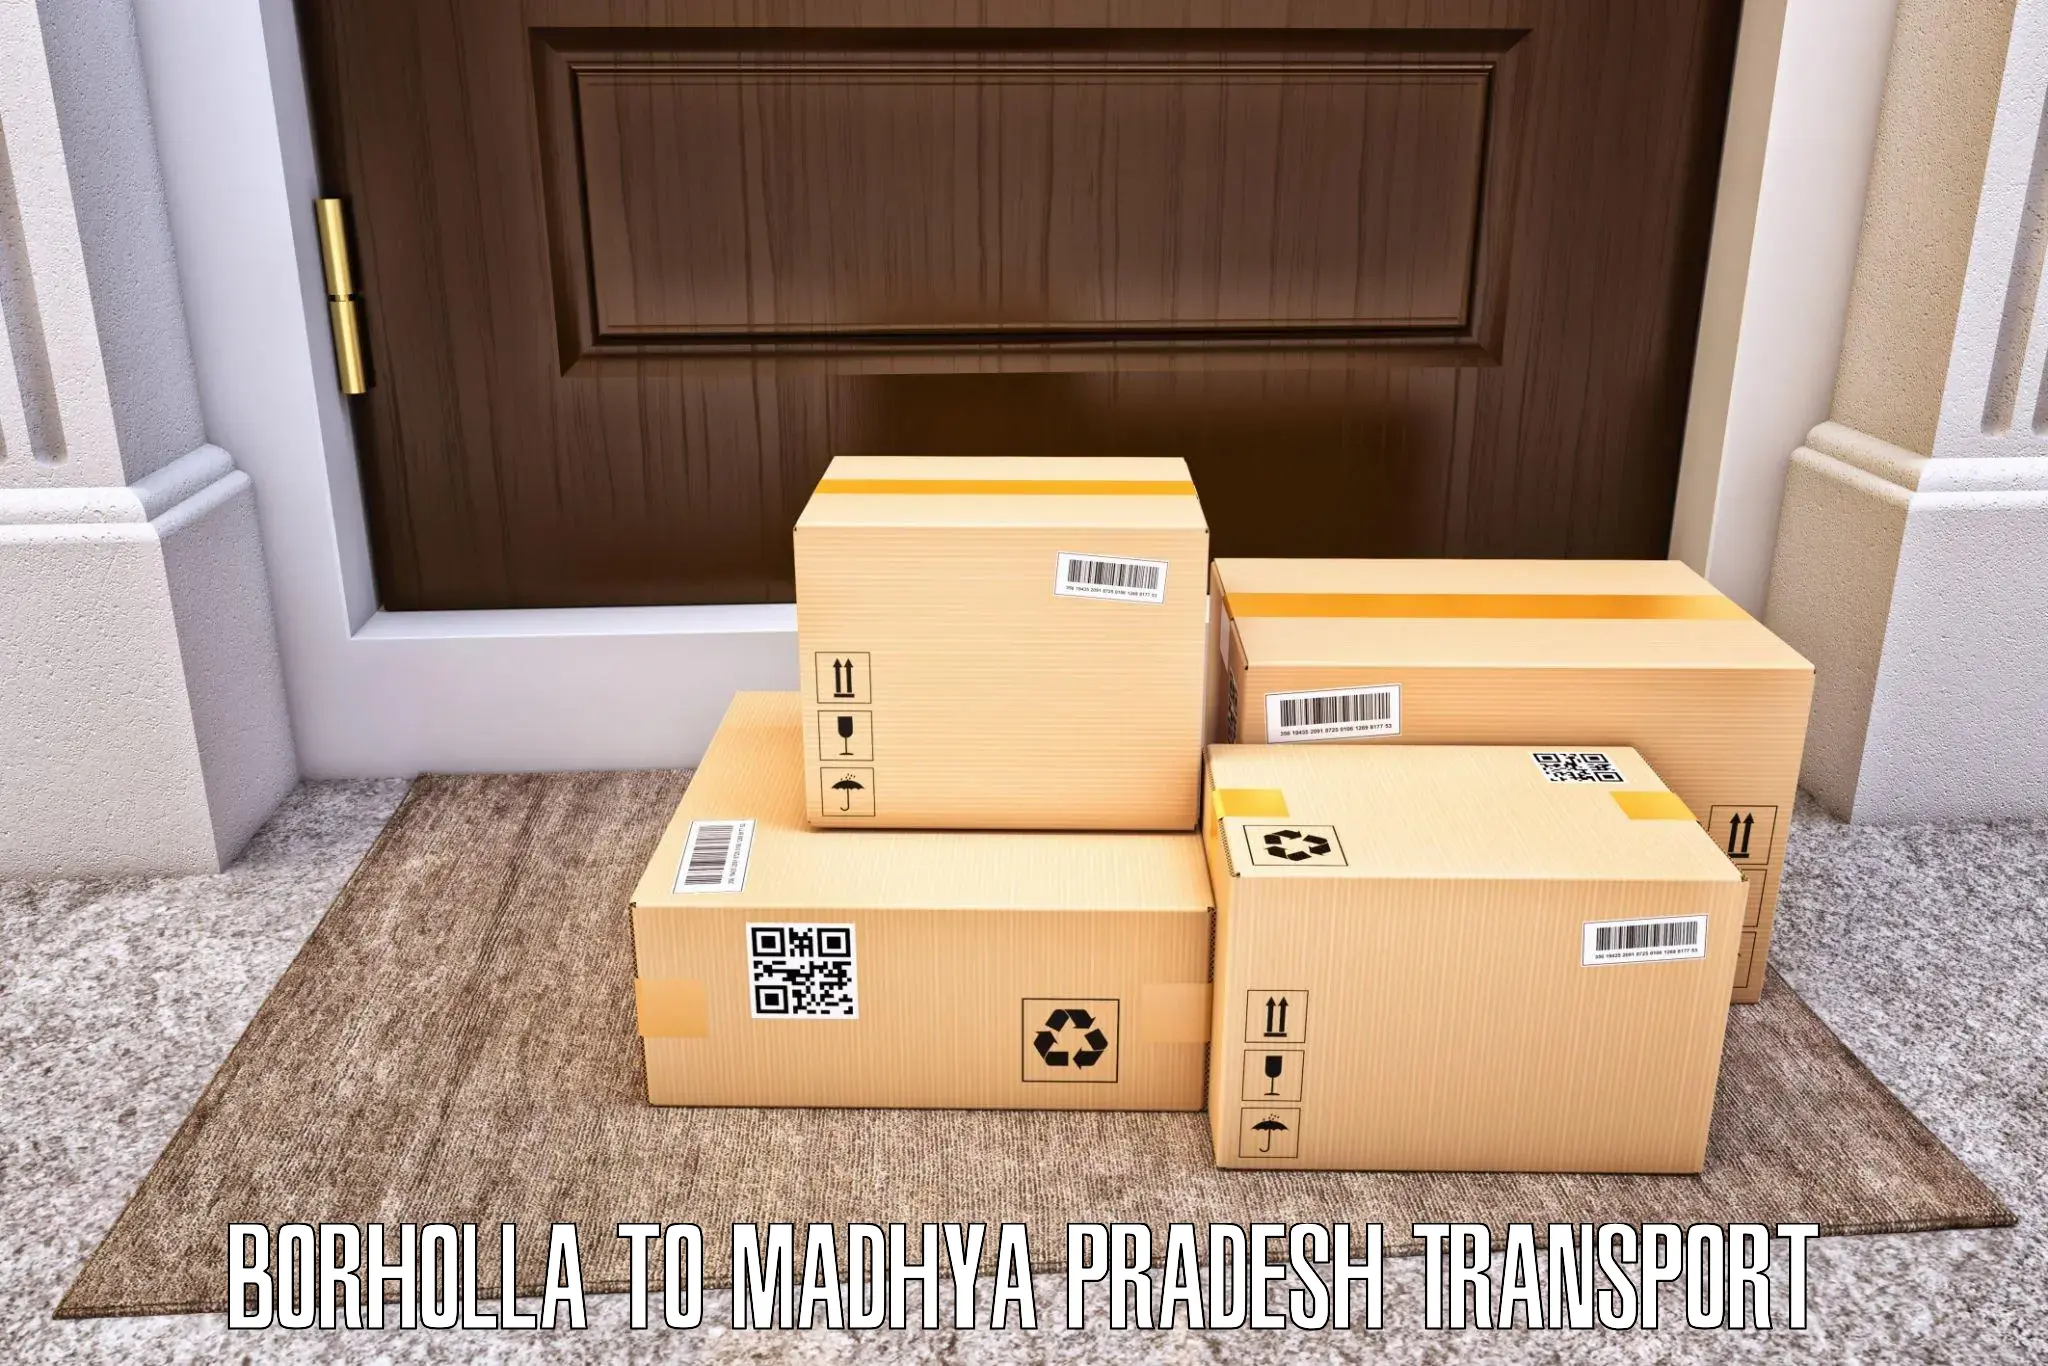 Air cargo transport services Borholla to Khandwa